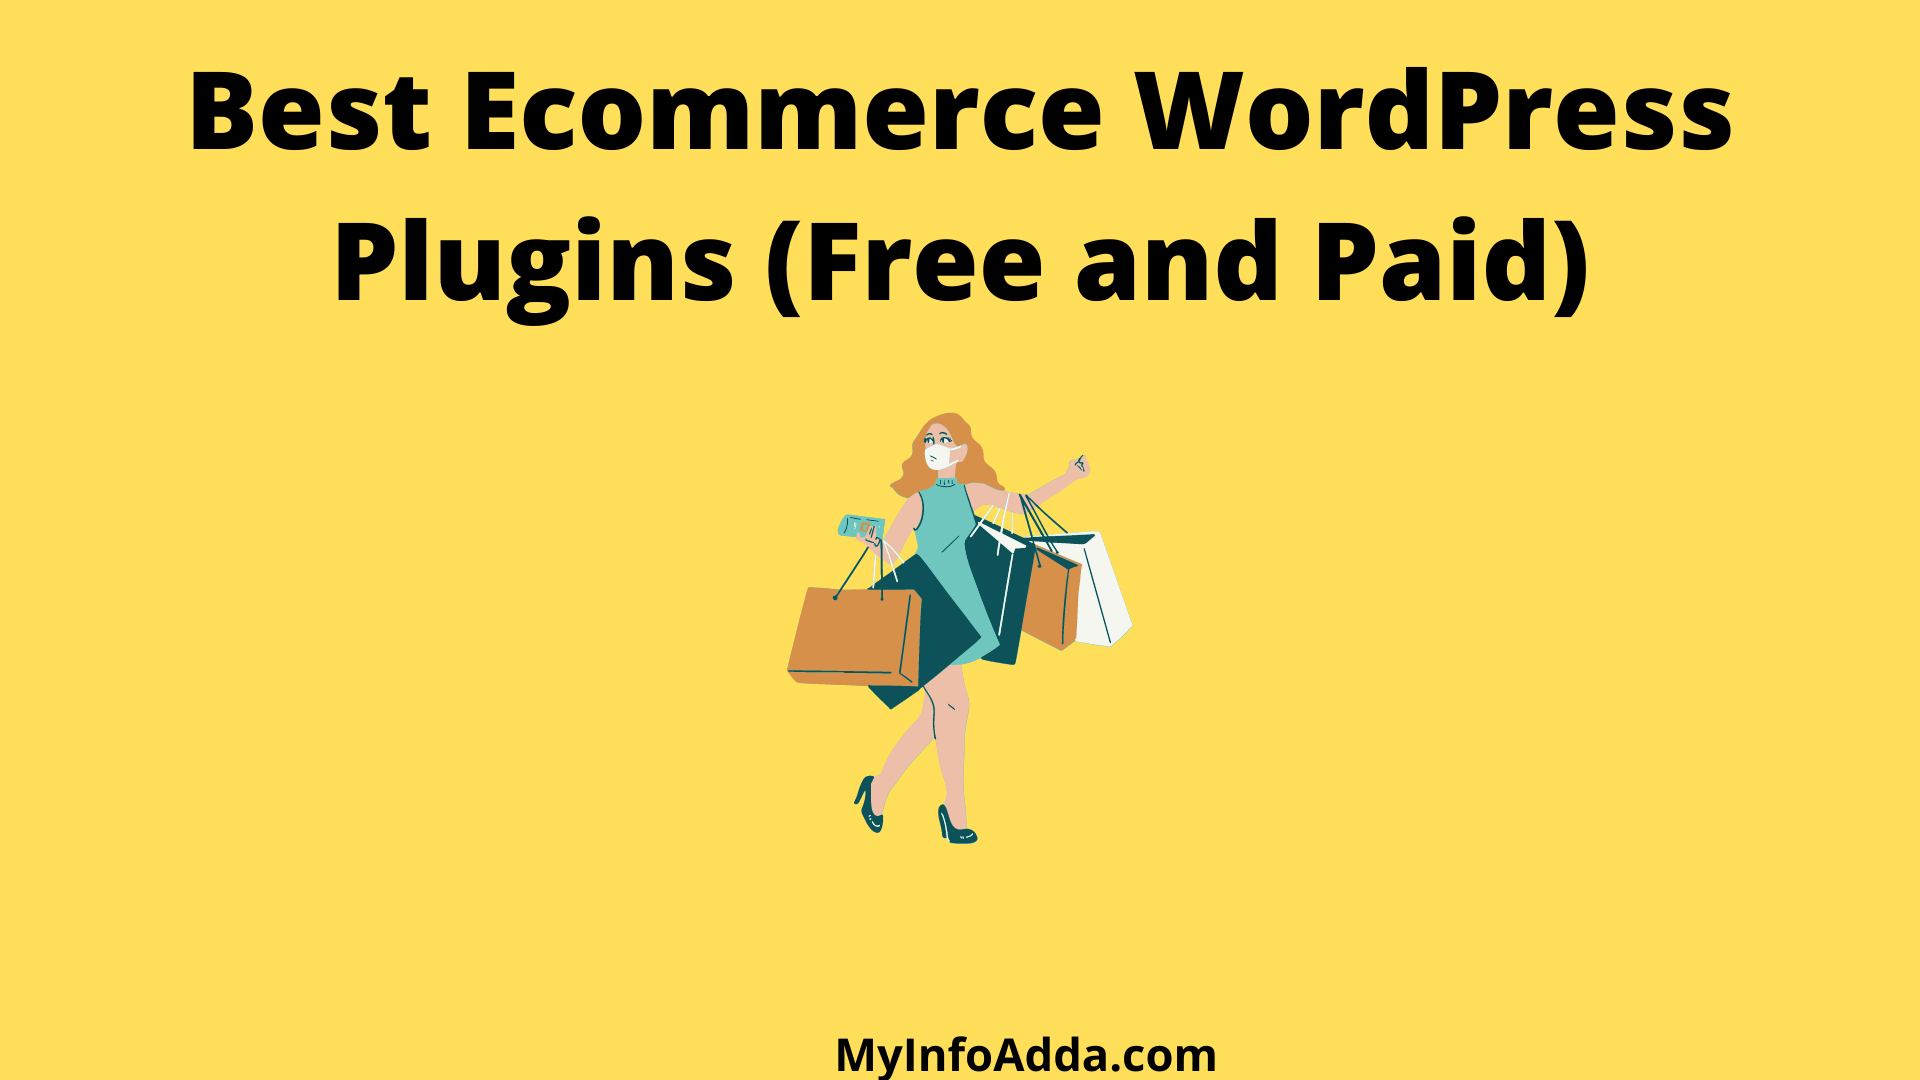 Best Ecommerce WordPress Plugins (Free and Paid)